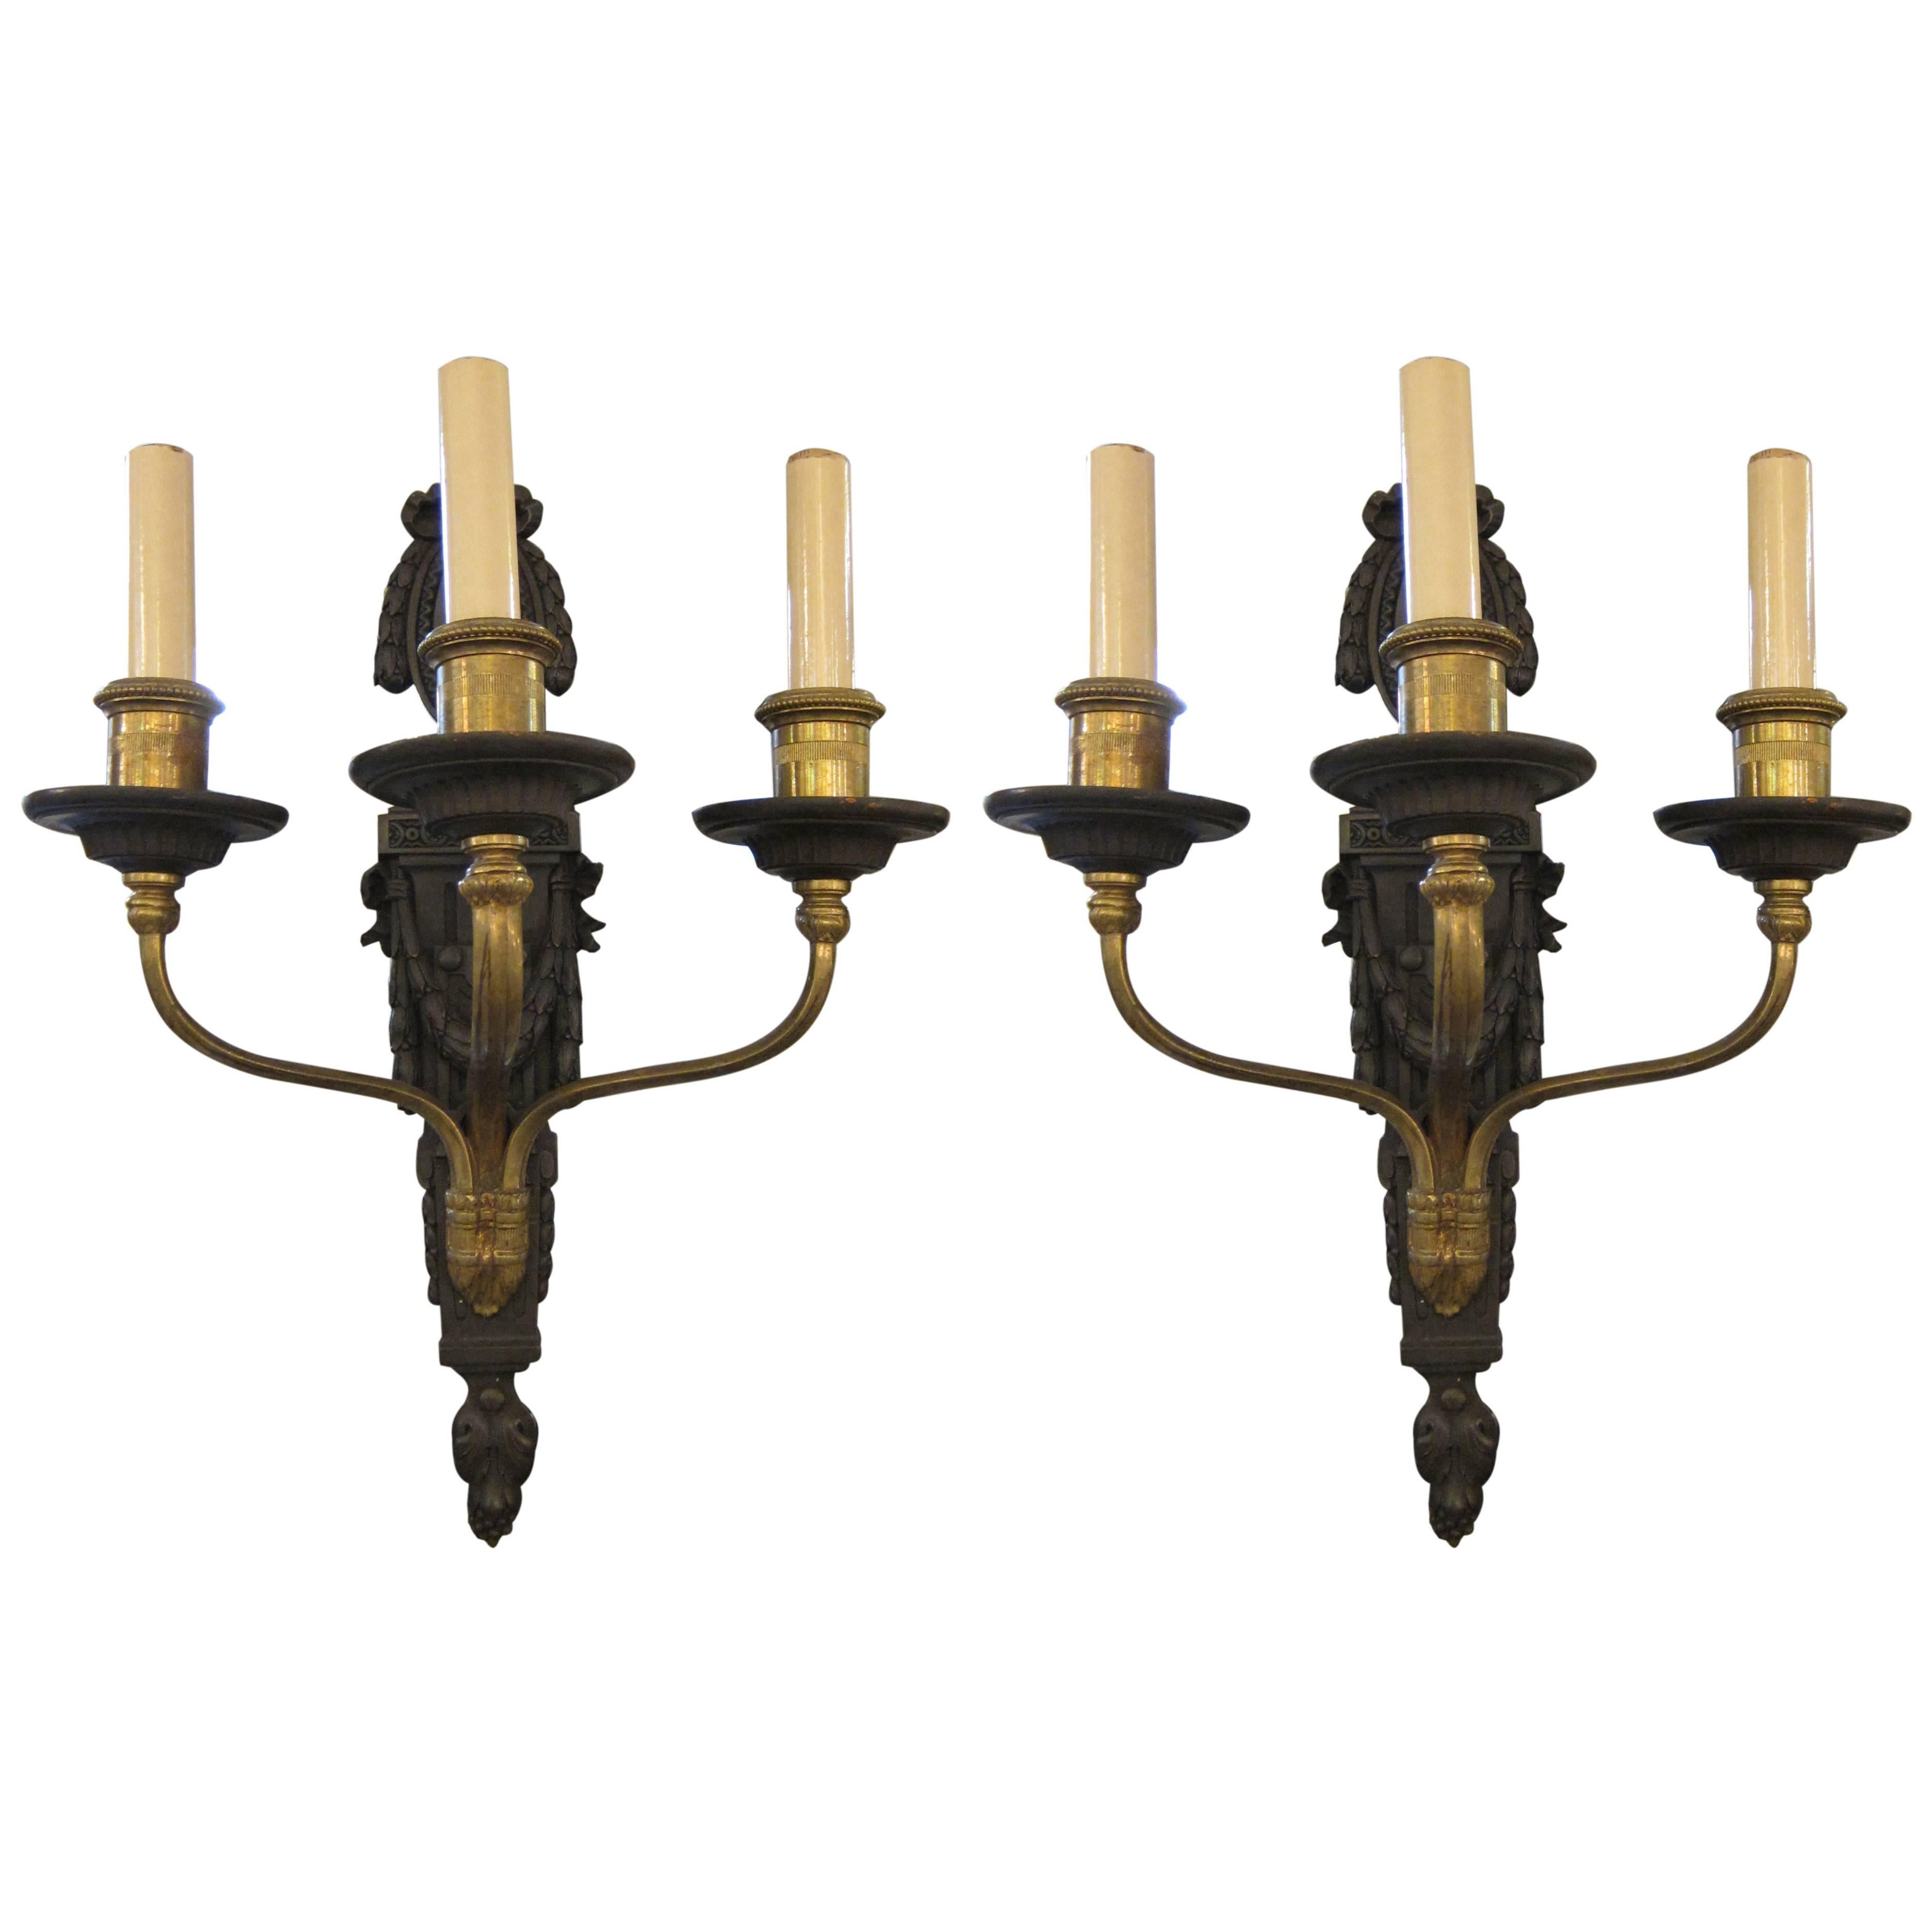 1910 Pair of Gilt Bronze Louis XV Style Sconces by E. F. Caldwell of New York